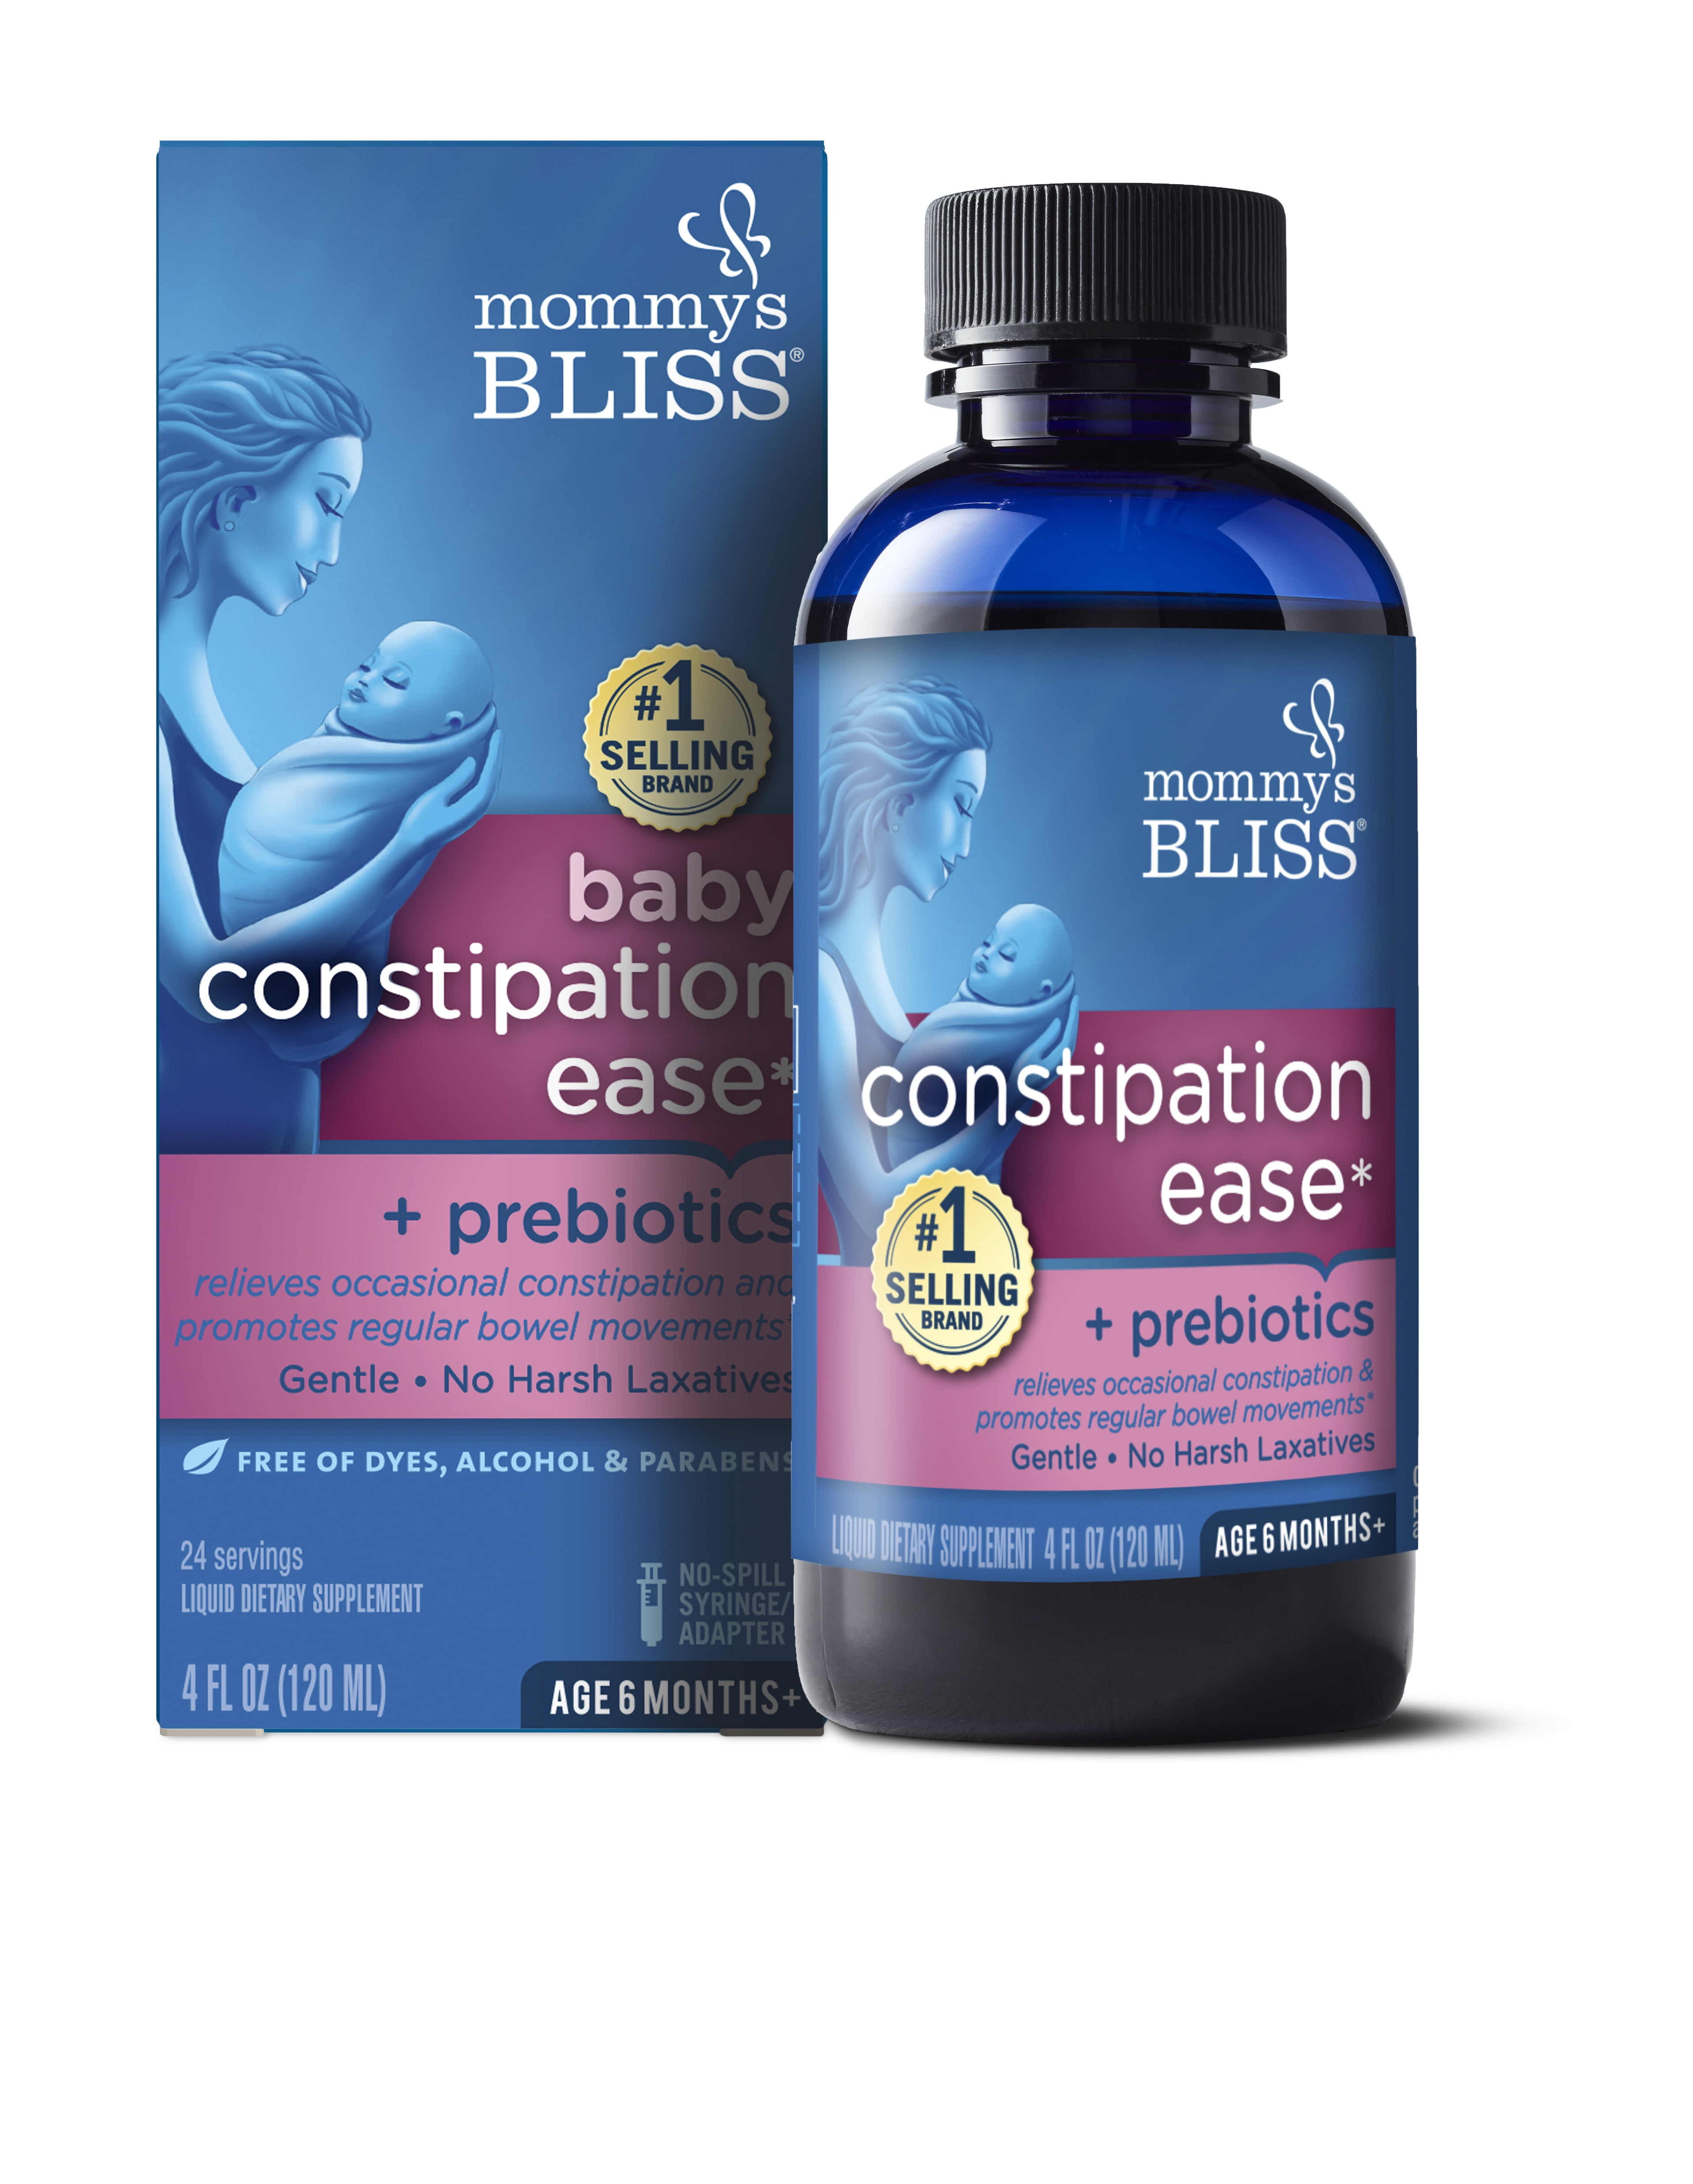 Mommy's Bliss Baby Constipation Ease + Prebiotics, 4 fl. Oz.